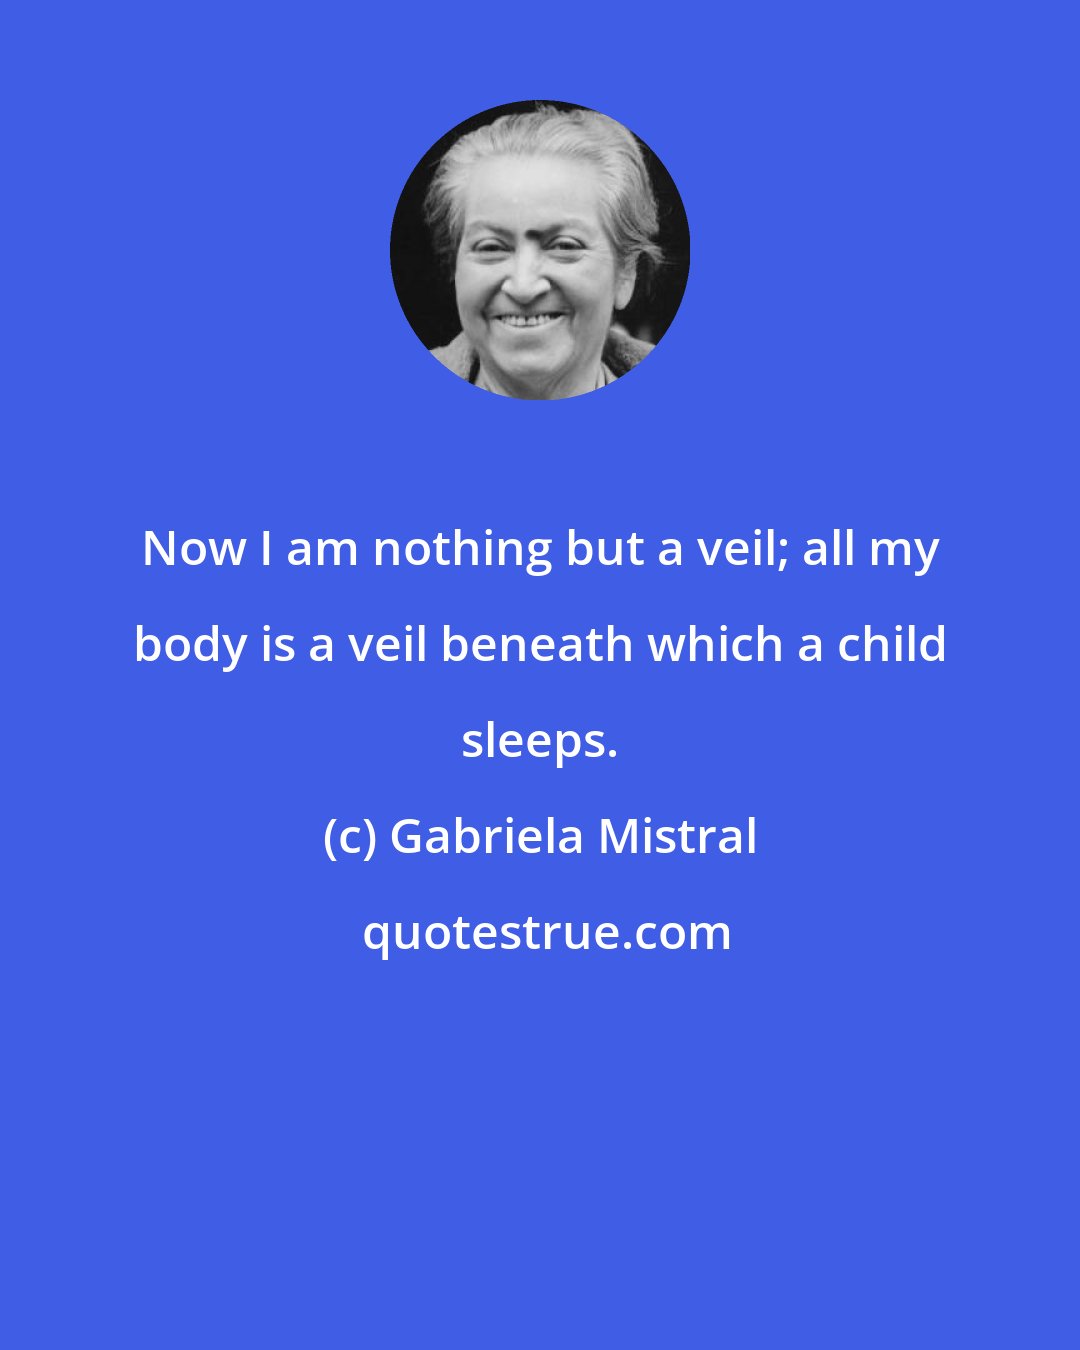 Gabriela Mistral: Now I am nothing but a veil; all my body is a veil beneath which a child sleeps.